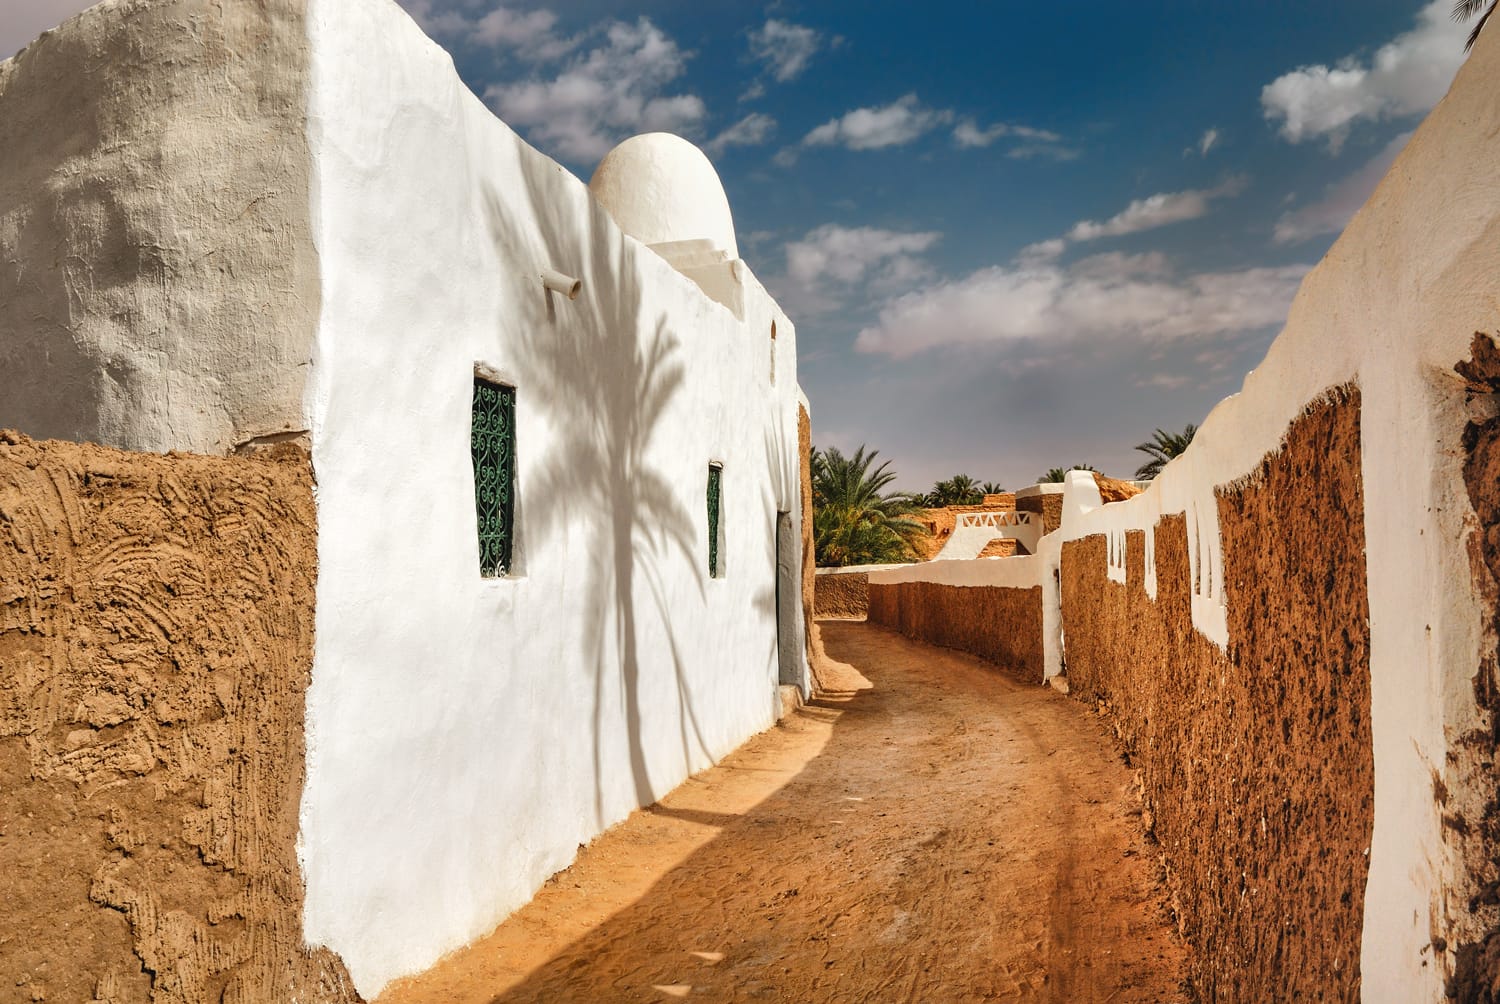 Ghadames, ancient berber city, Libya, UNESCO wold heritage site. The pearl of the desert. 